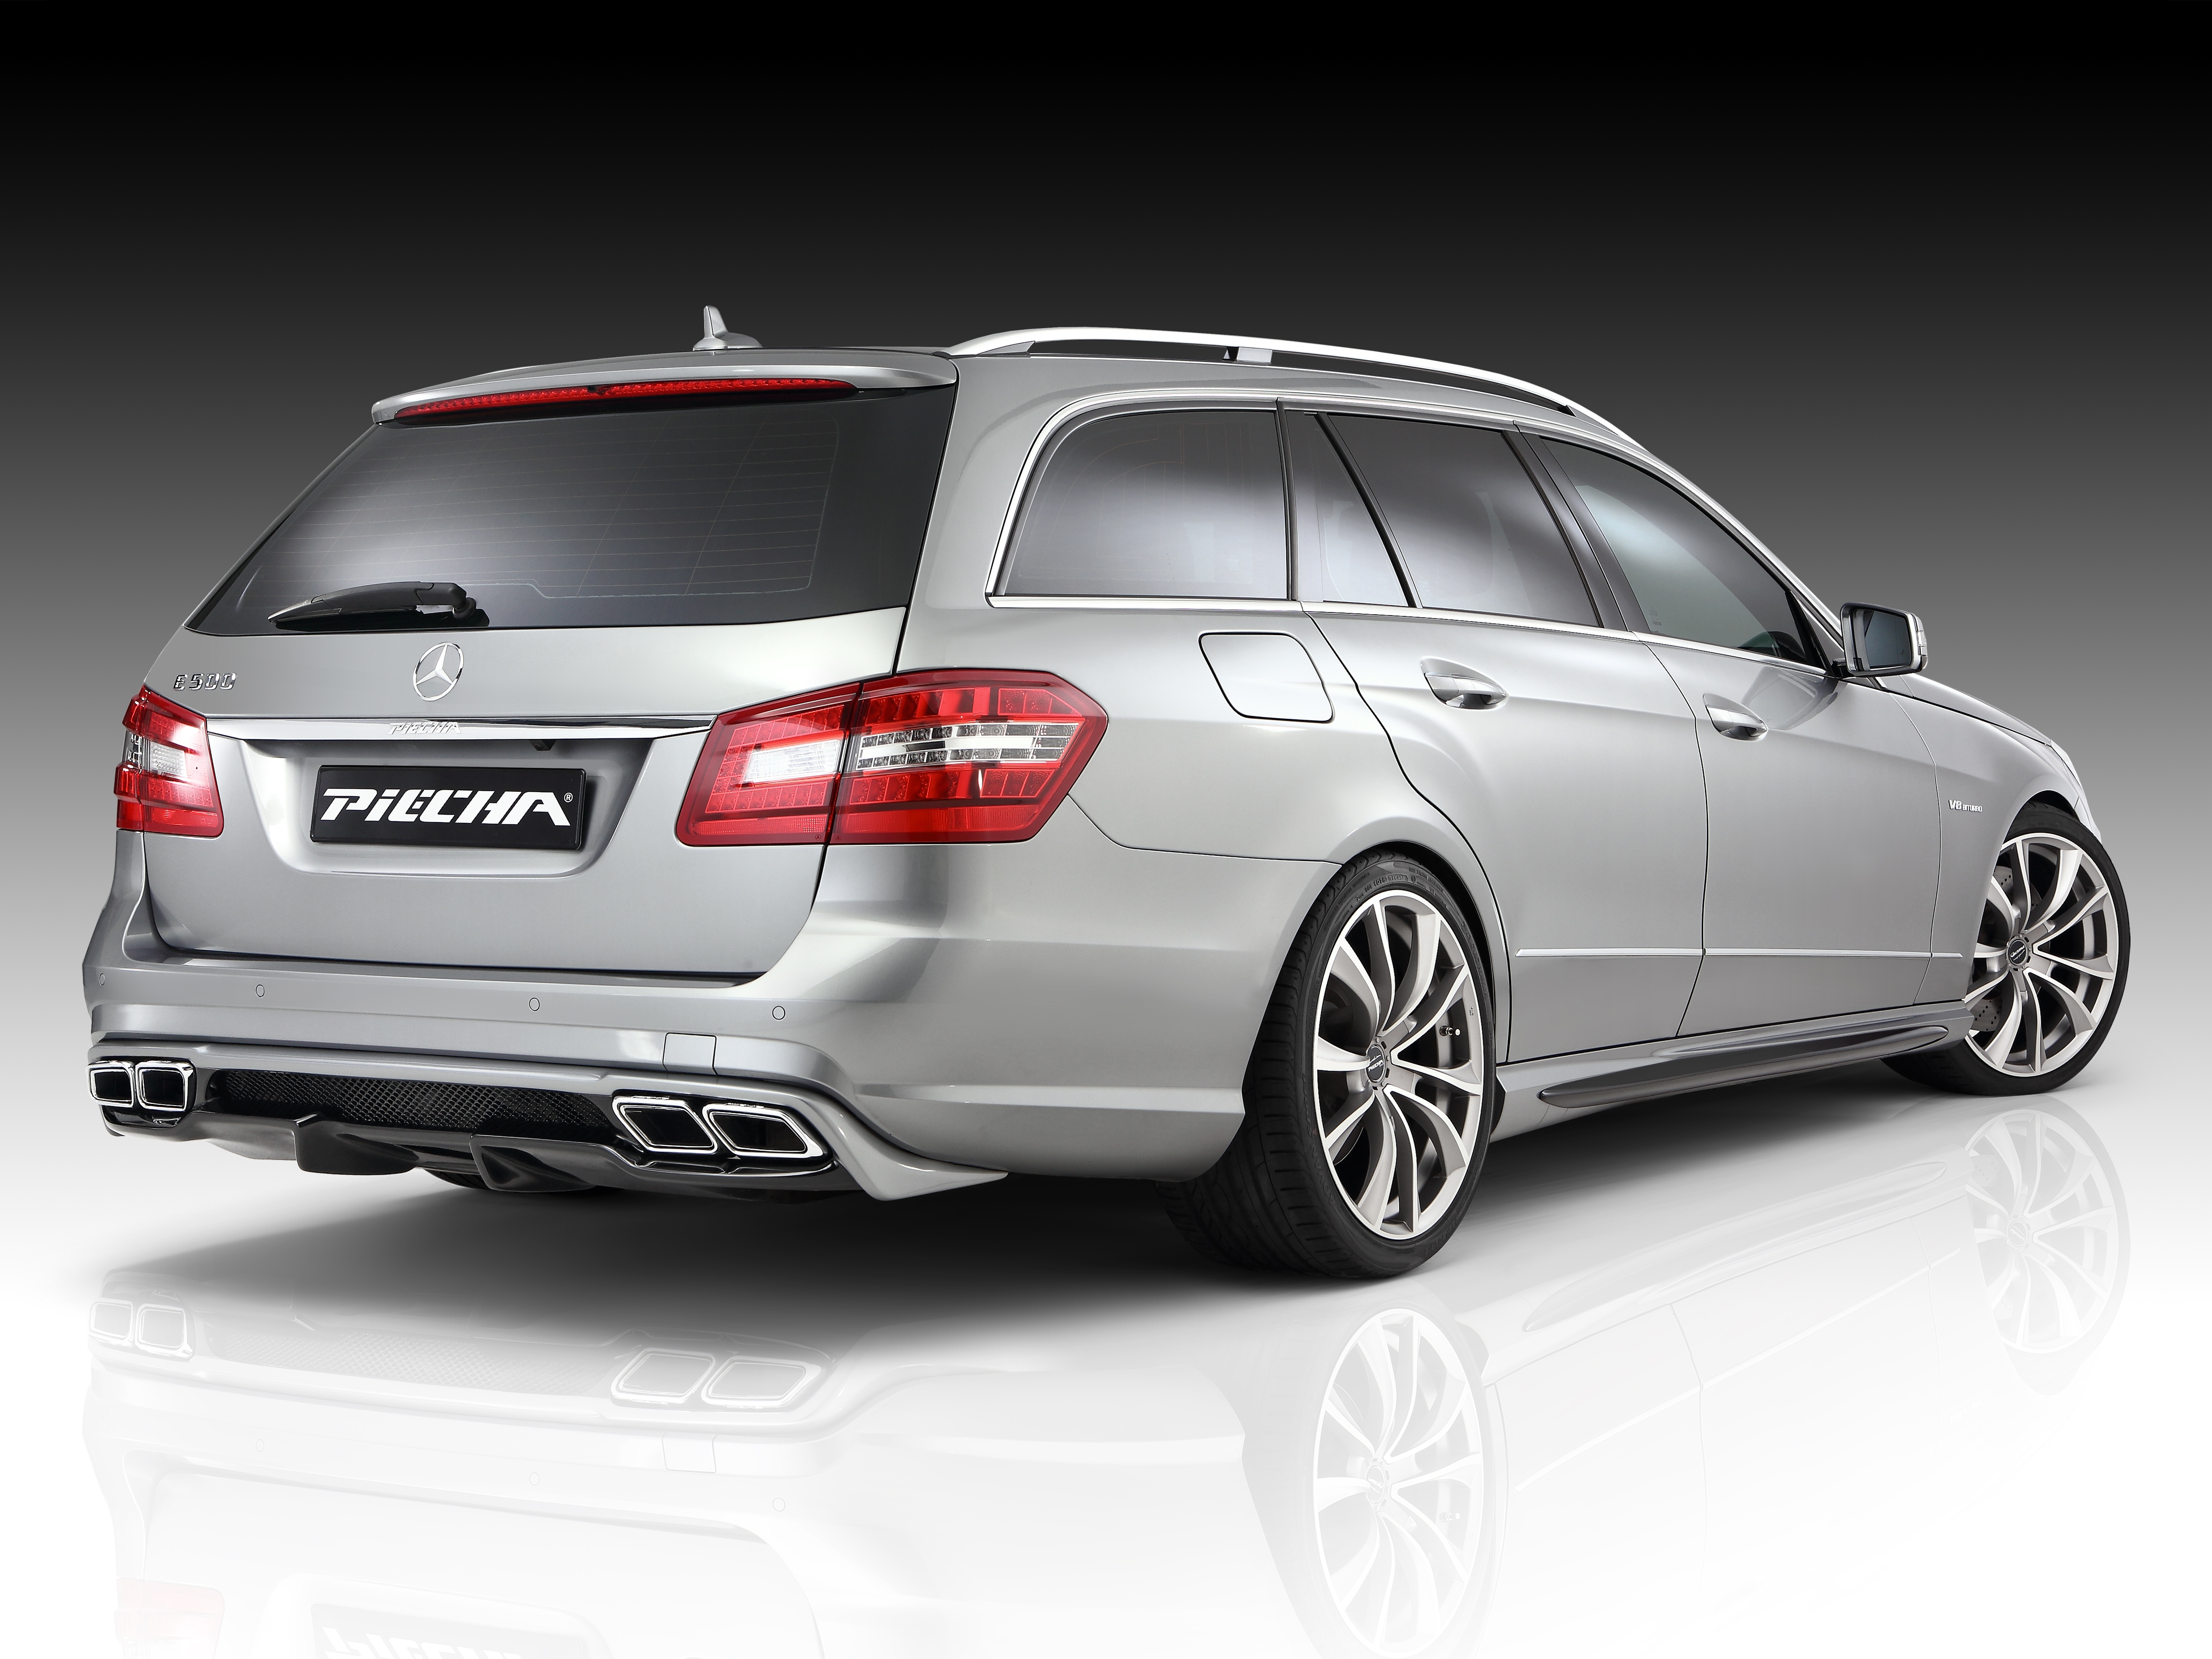 Sportive styling for E class W212 with amg bumpers from